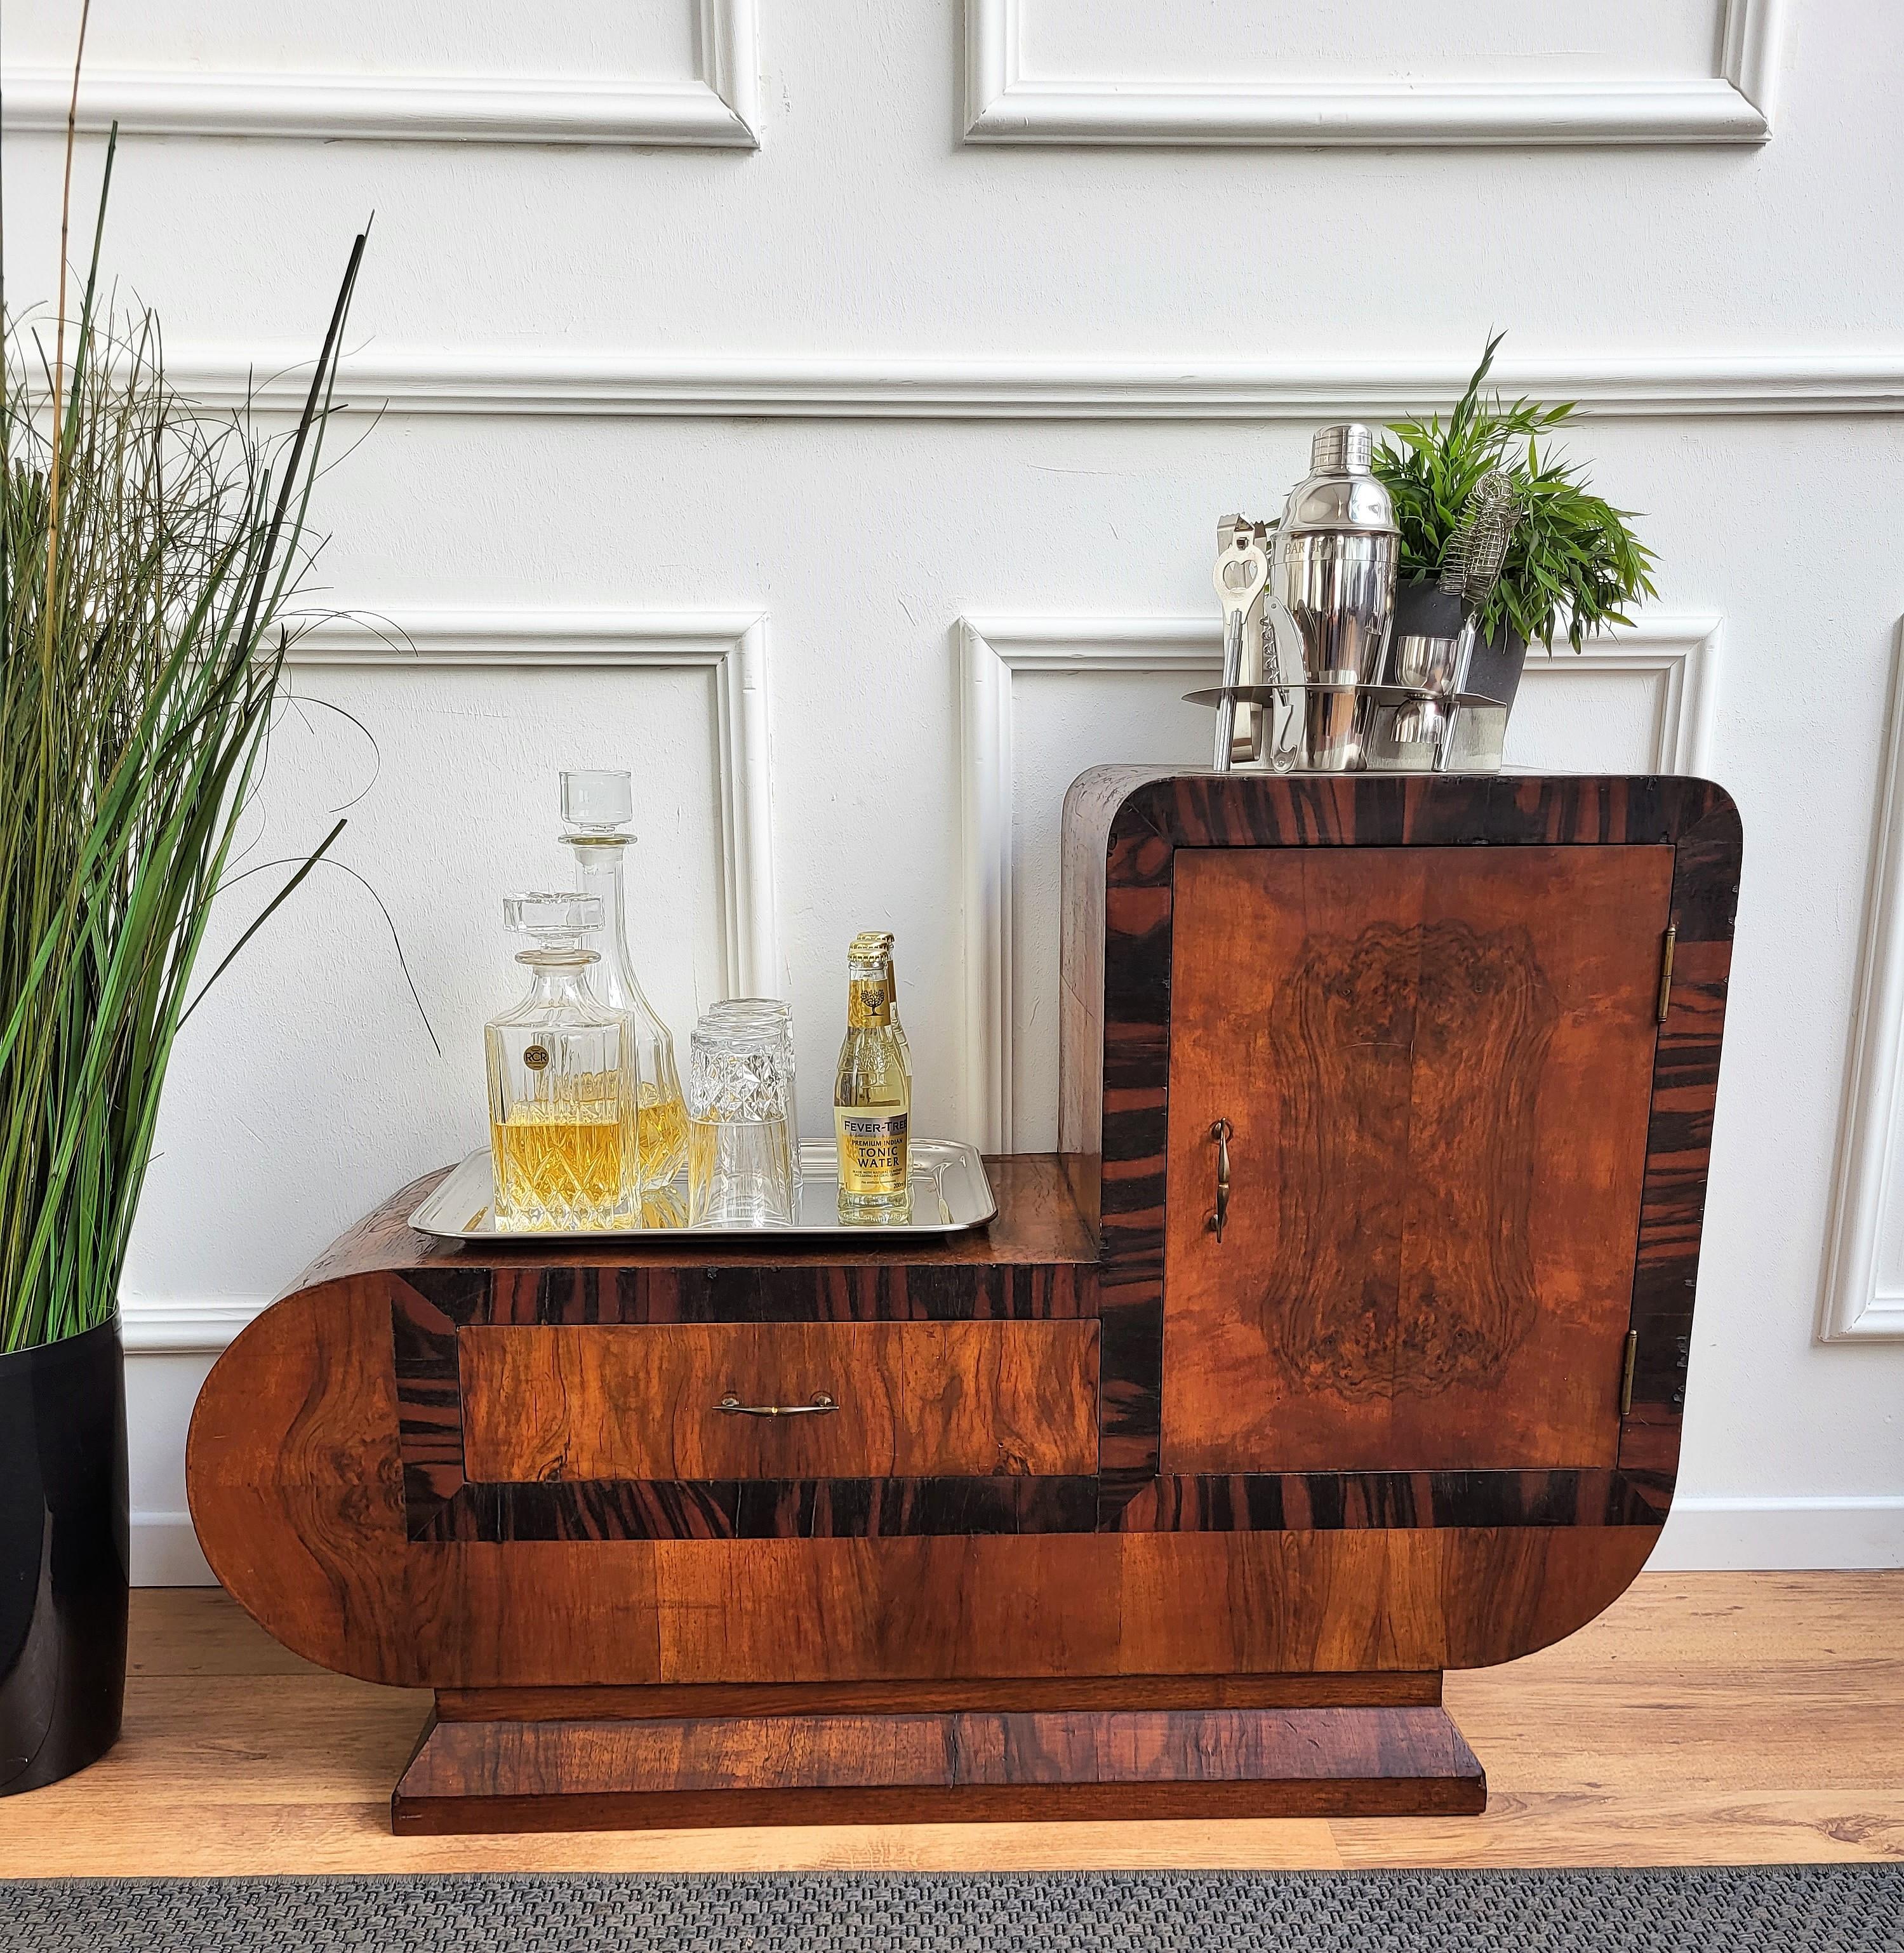 Very elegant Italian dry bar cabinet in typical Art Deco shape and materials with its beautiful veneer walnut briar burl wood, one door and a drawer both framed with wood veneer. The Art Deco style, that preceded Hollywood Regency and thereafter